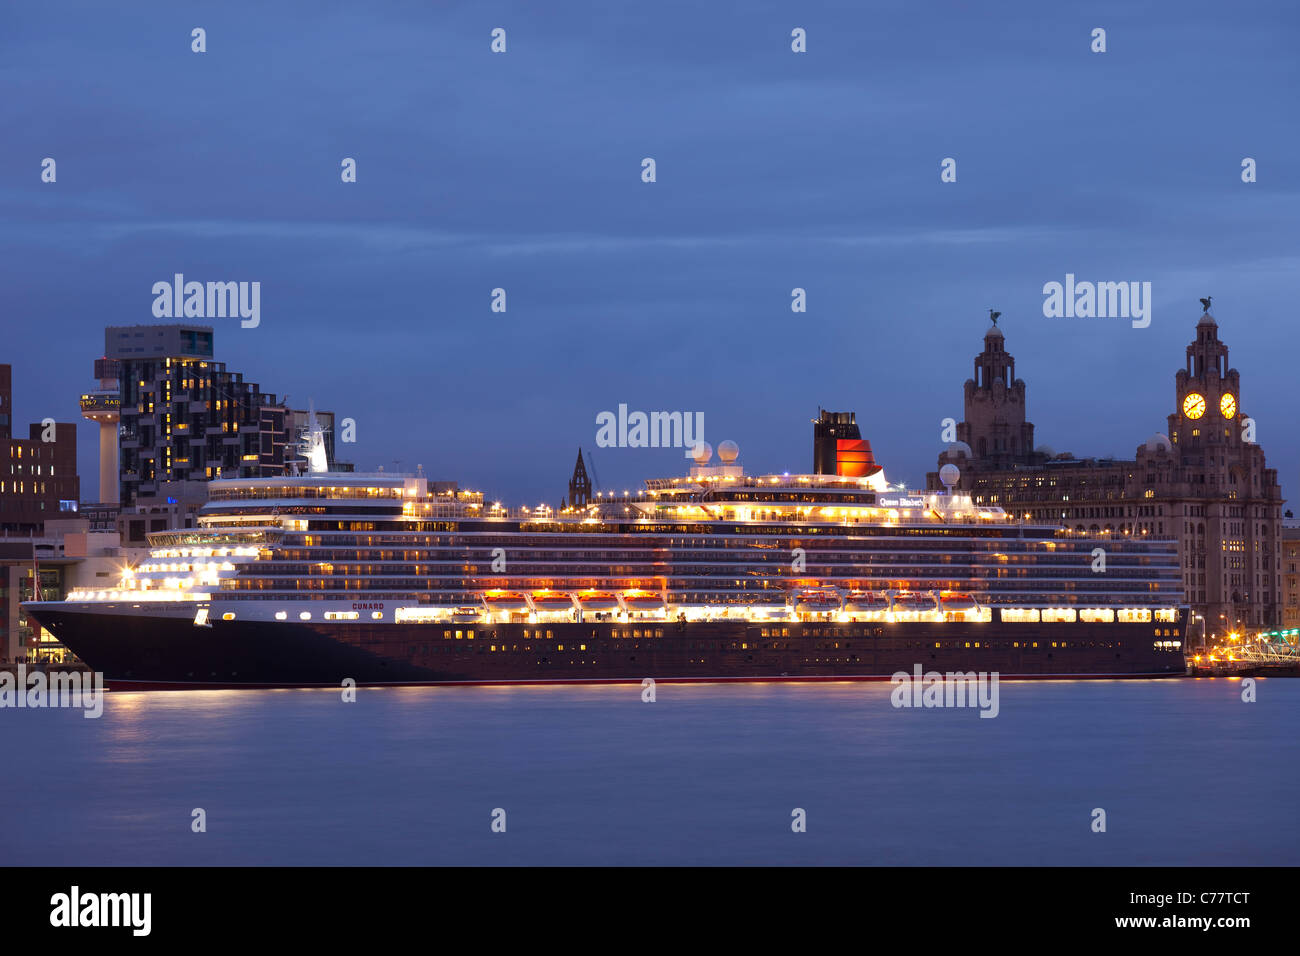 The Queen Elizabeth cruise liner moored at the Liverpool terminal, with the Liver Building visible behind her. Stock Photo